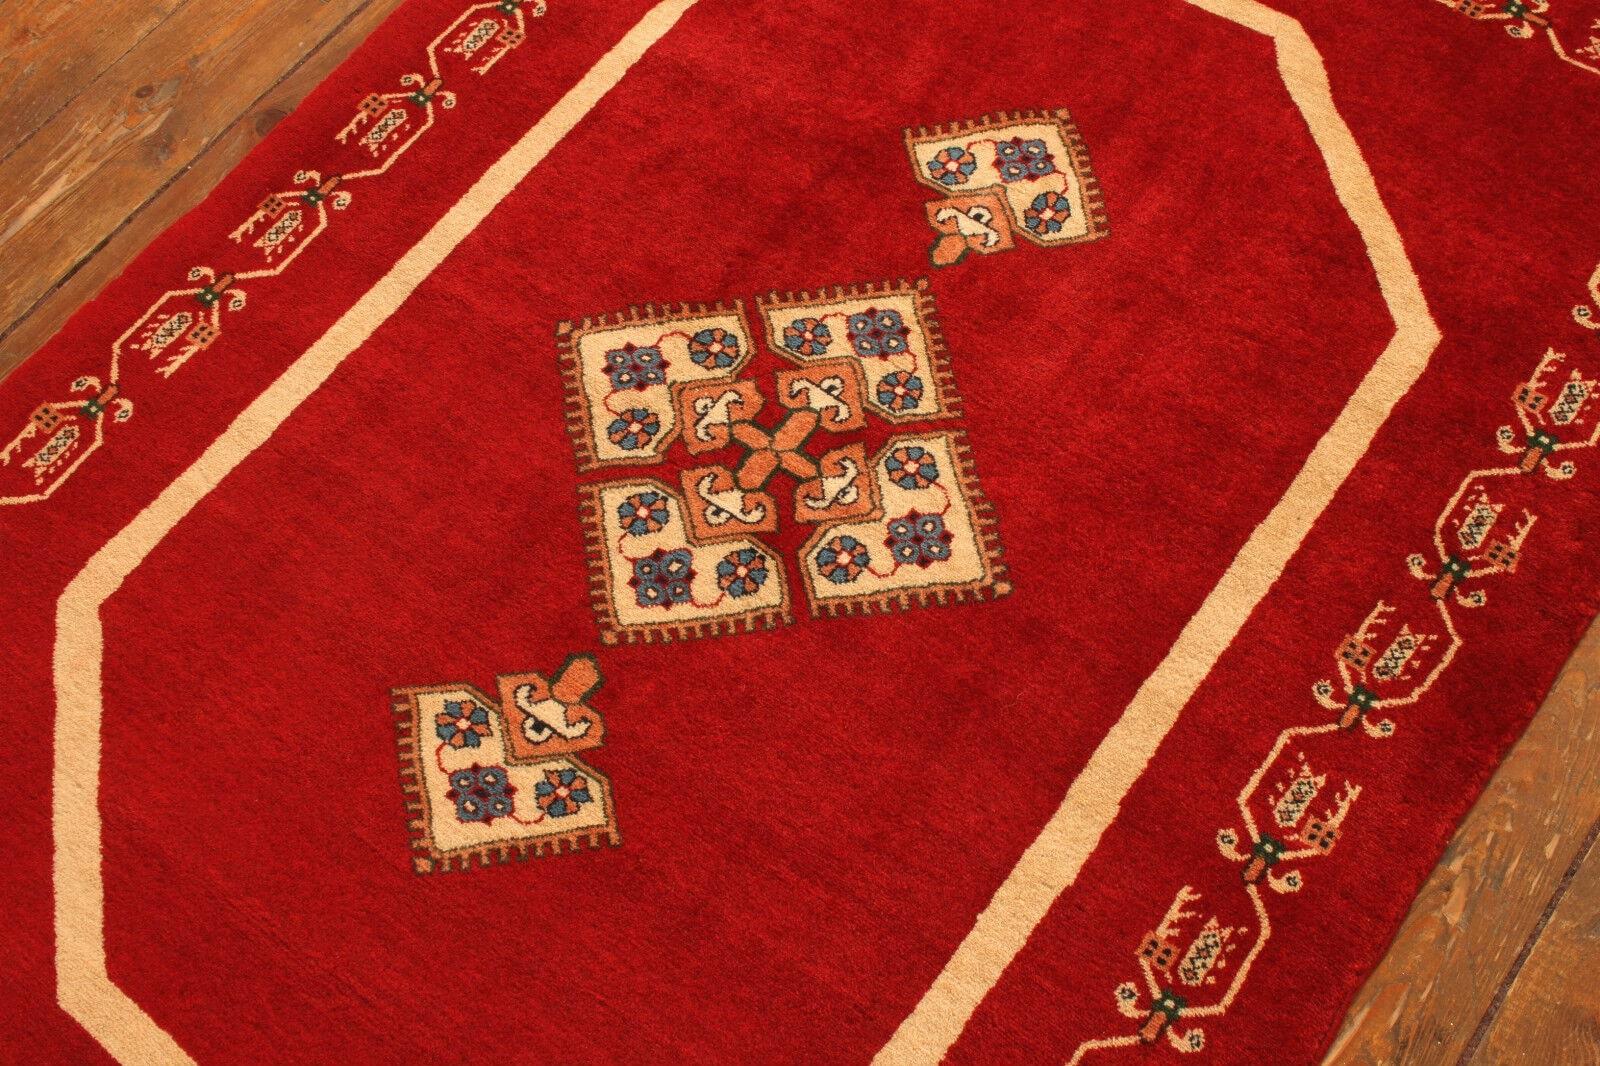 Handmade Vintage Persian Style Yalameh Rug

Dimensions: 3.4’ x 4.9’ (approximately 105 cm x 150 cm)
Material: 100% Wool
Era: 1990s
Condition: Excellent, as new

This exquisite handmade Yalameh rug embodies the rich cultural heritage of Persian